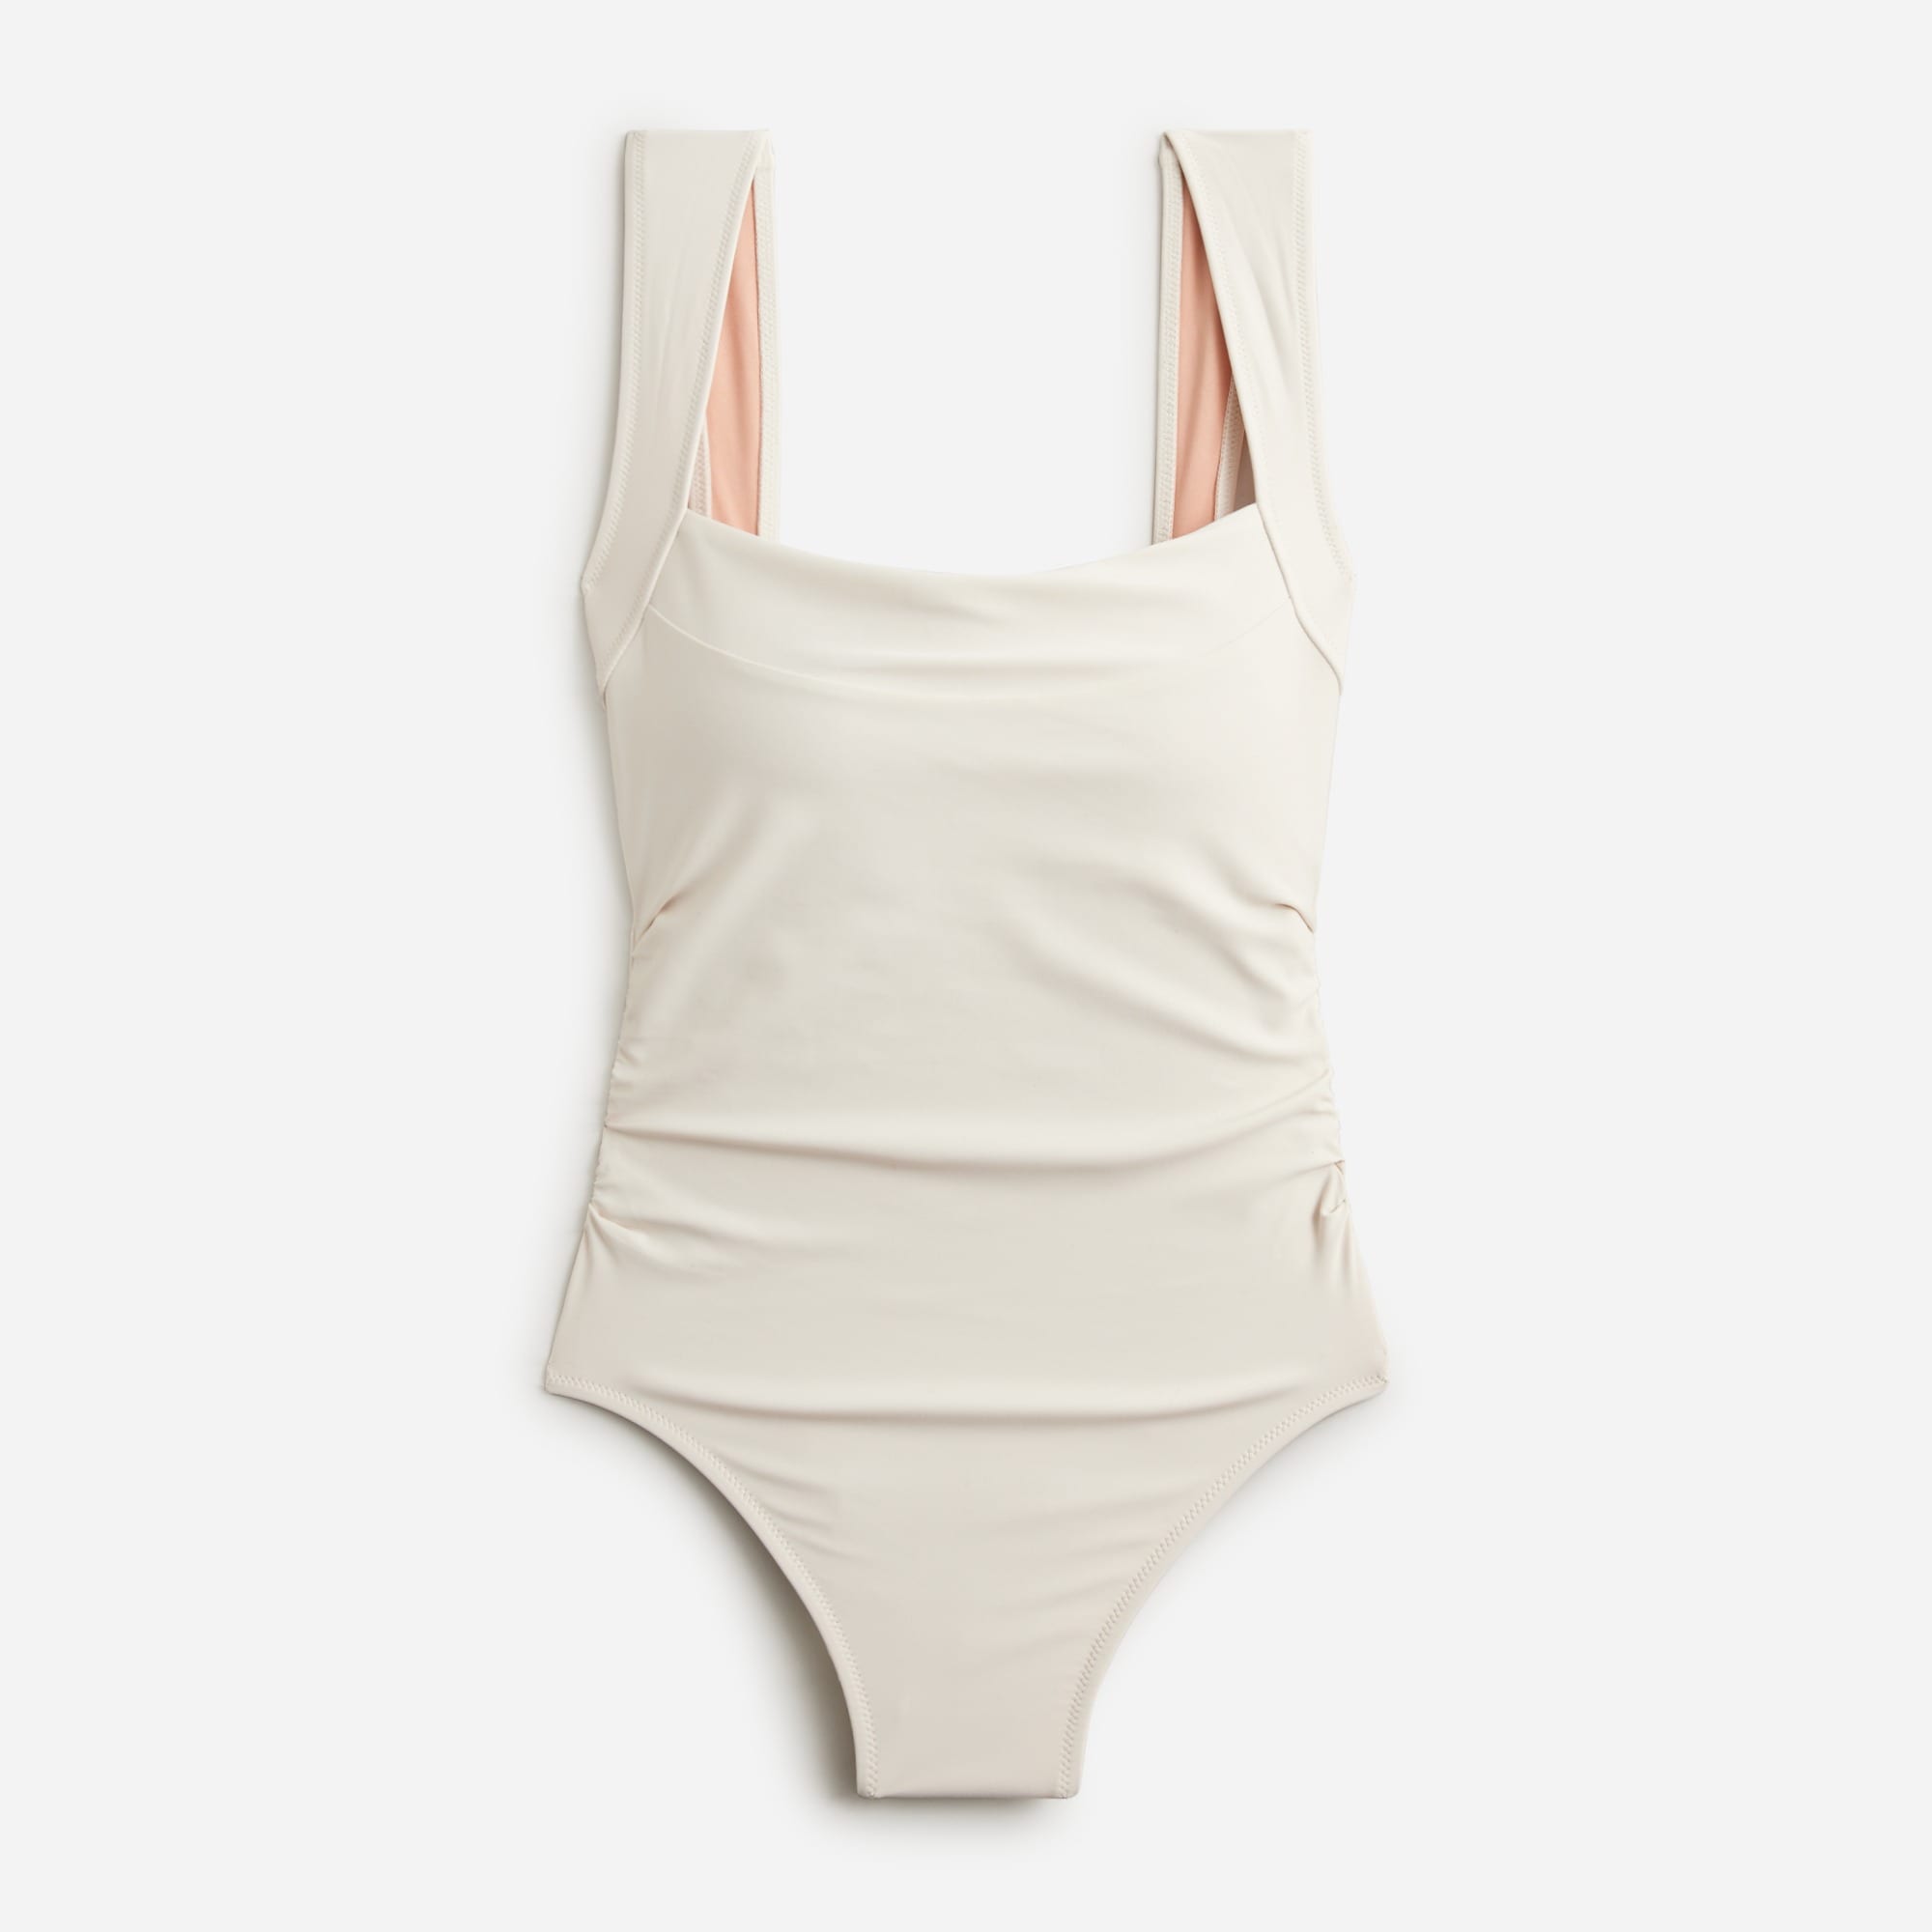  Ruched squareneck one-piece swimsuit